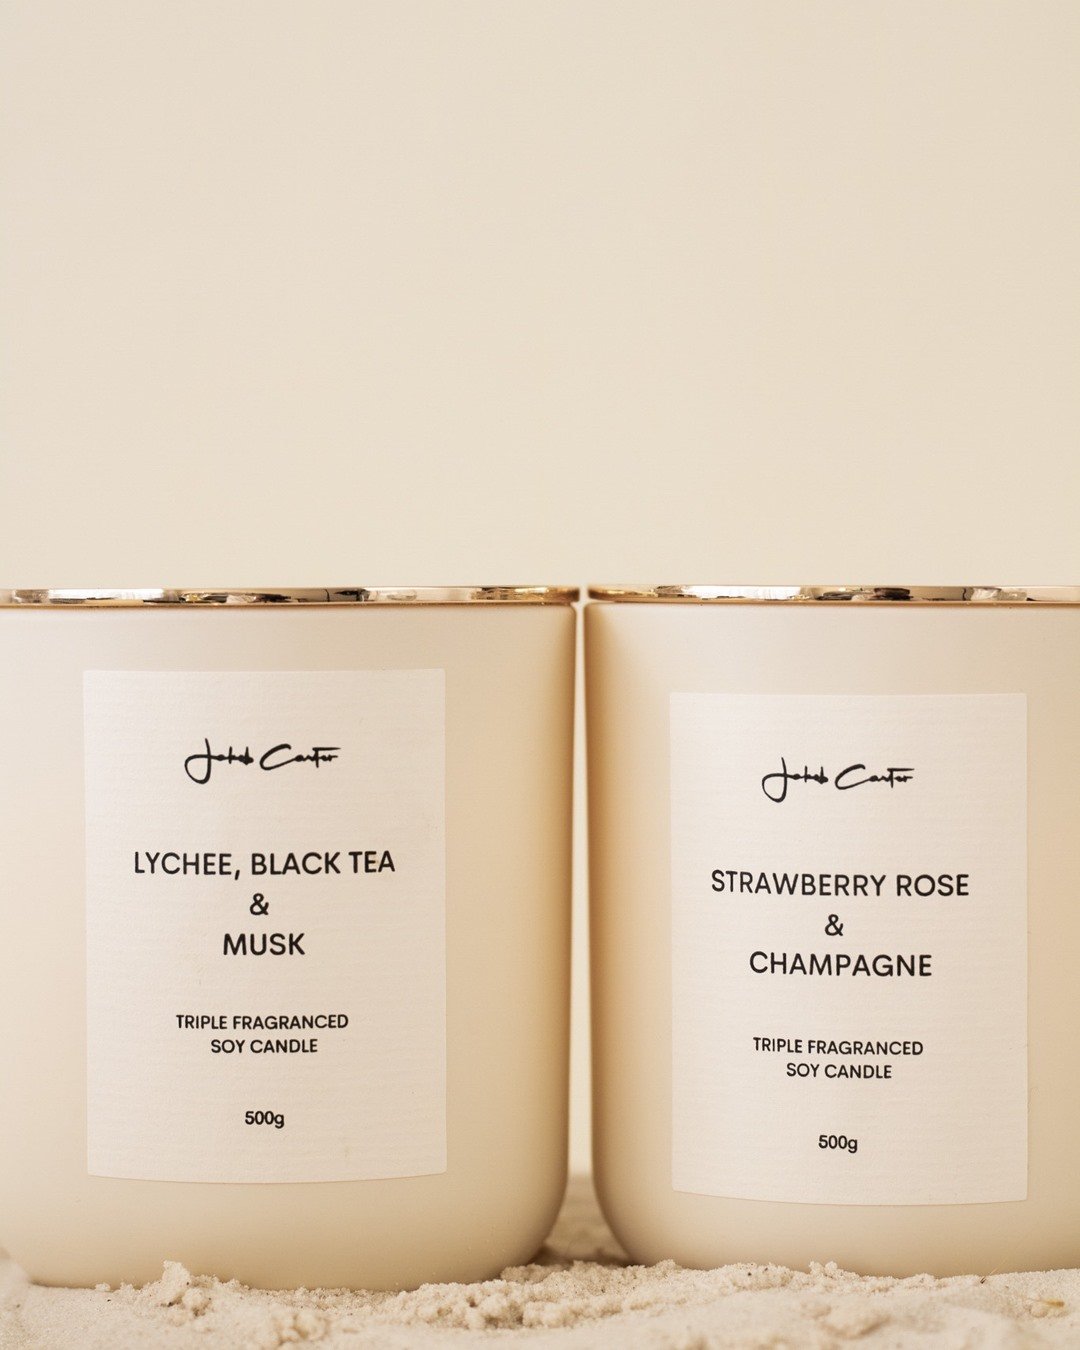 Jakob Carter Candles in Strawberry Rose & Champagne